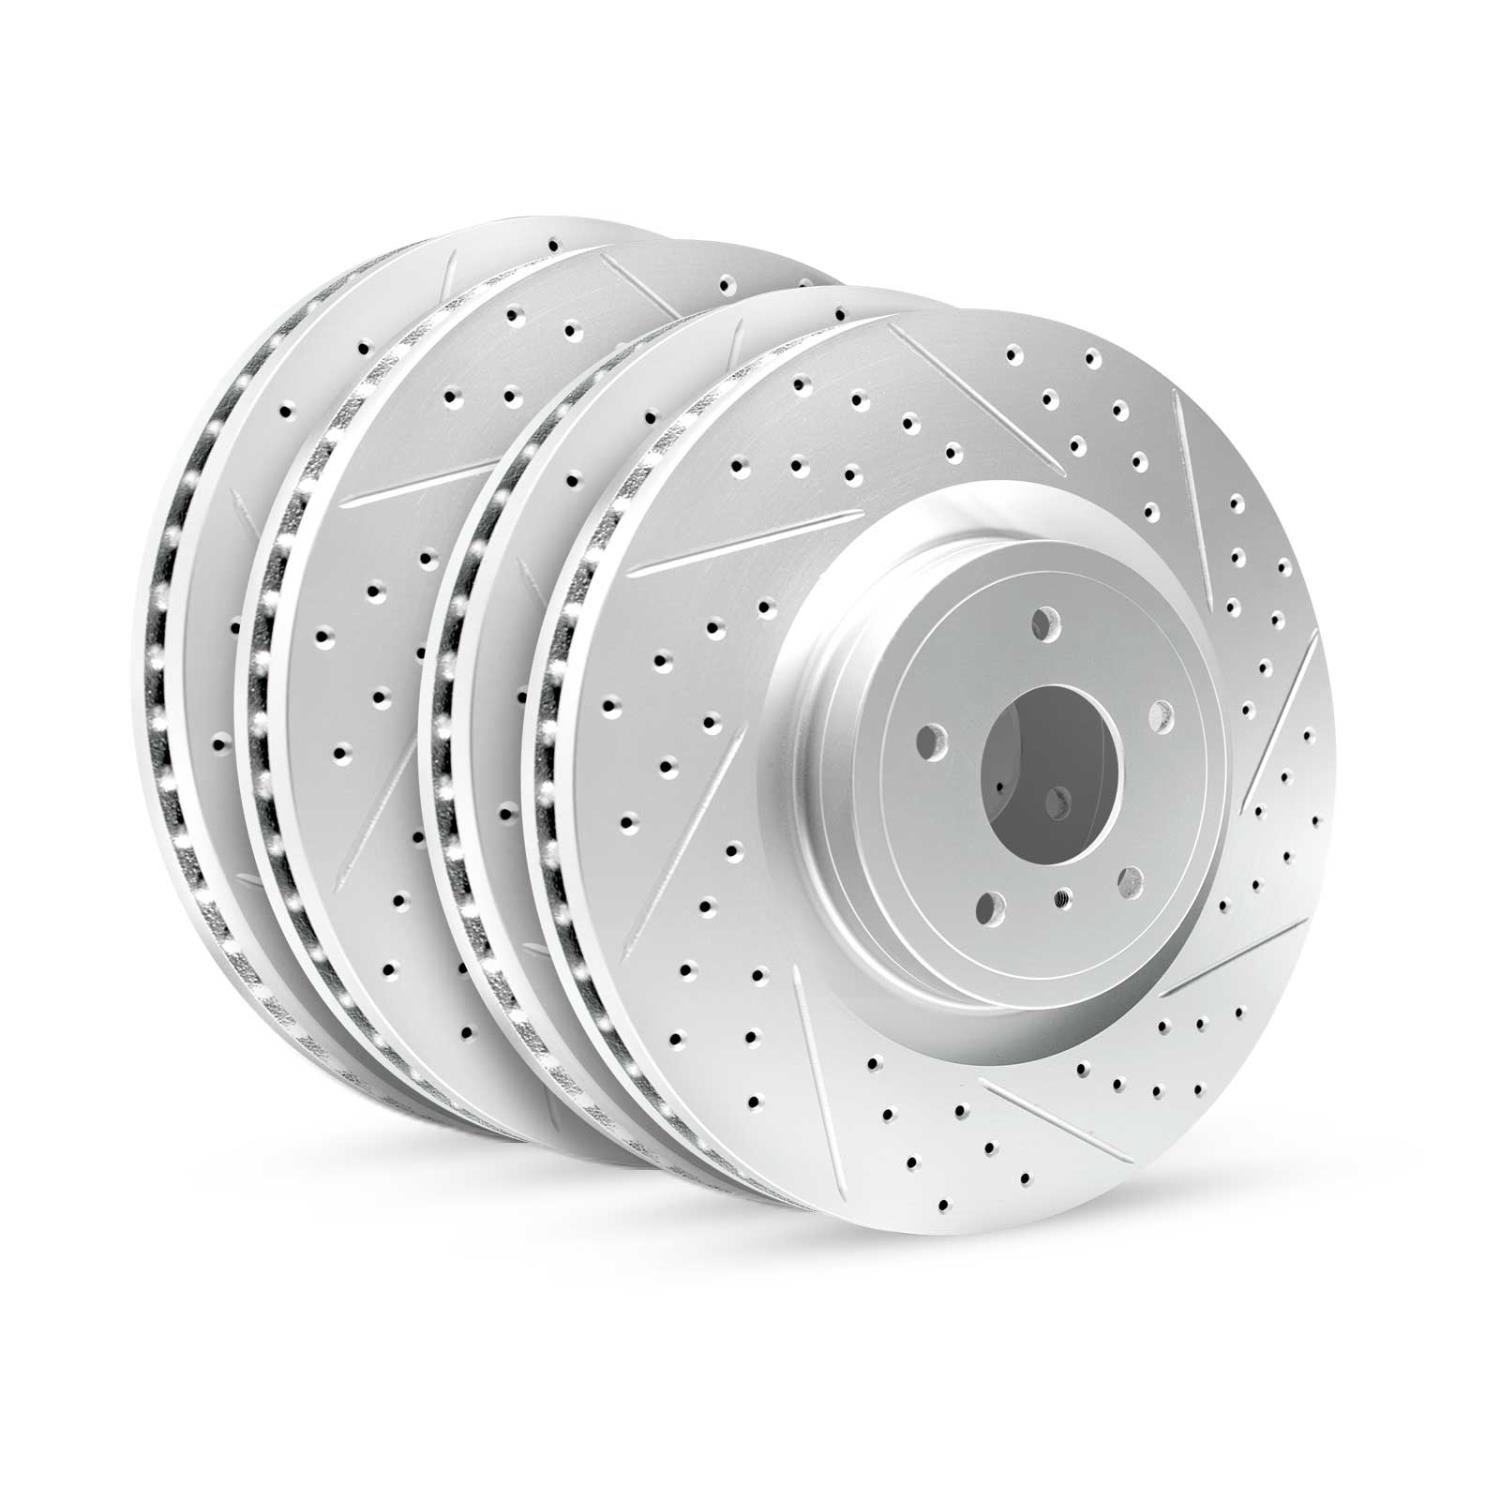 GEO-Carbon Drilled/Slotted Rotors, 1999-2003 Lexus/Toyota/Scion,